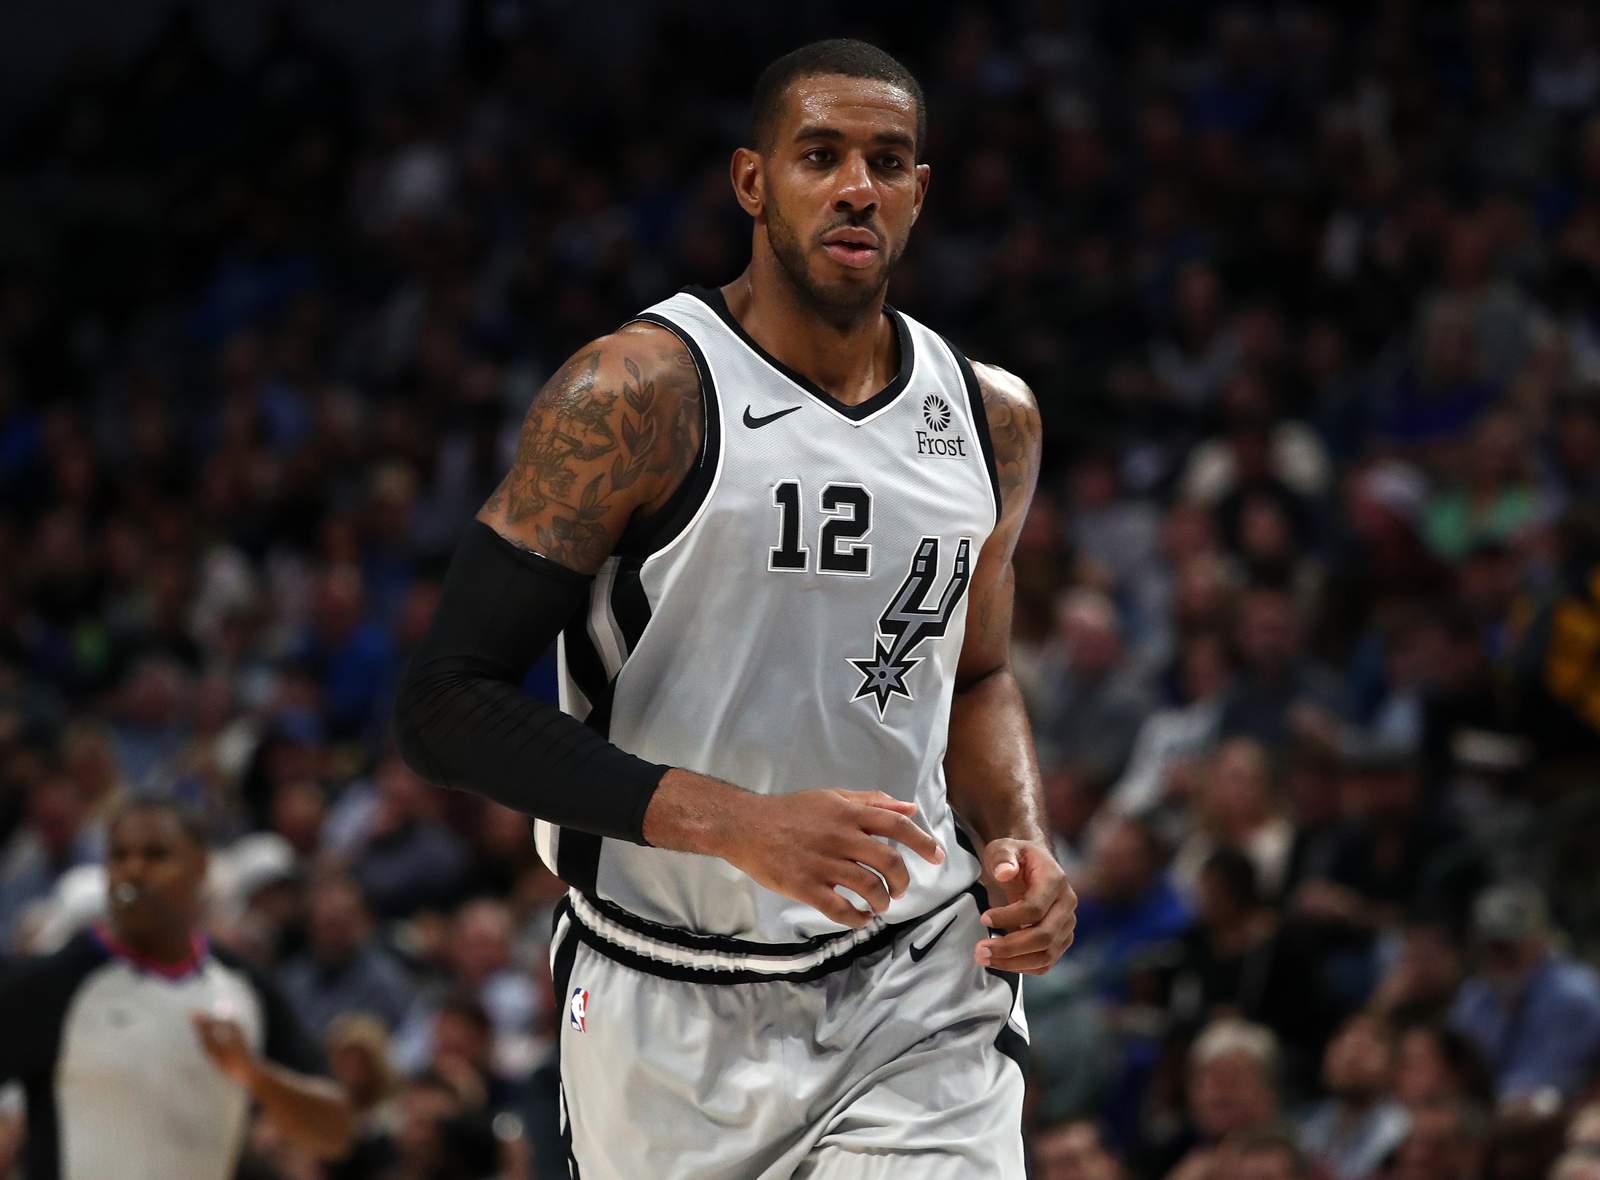 LaMarcus Aldridge announces retirement from NBA after suffering heart issue